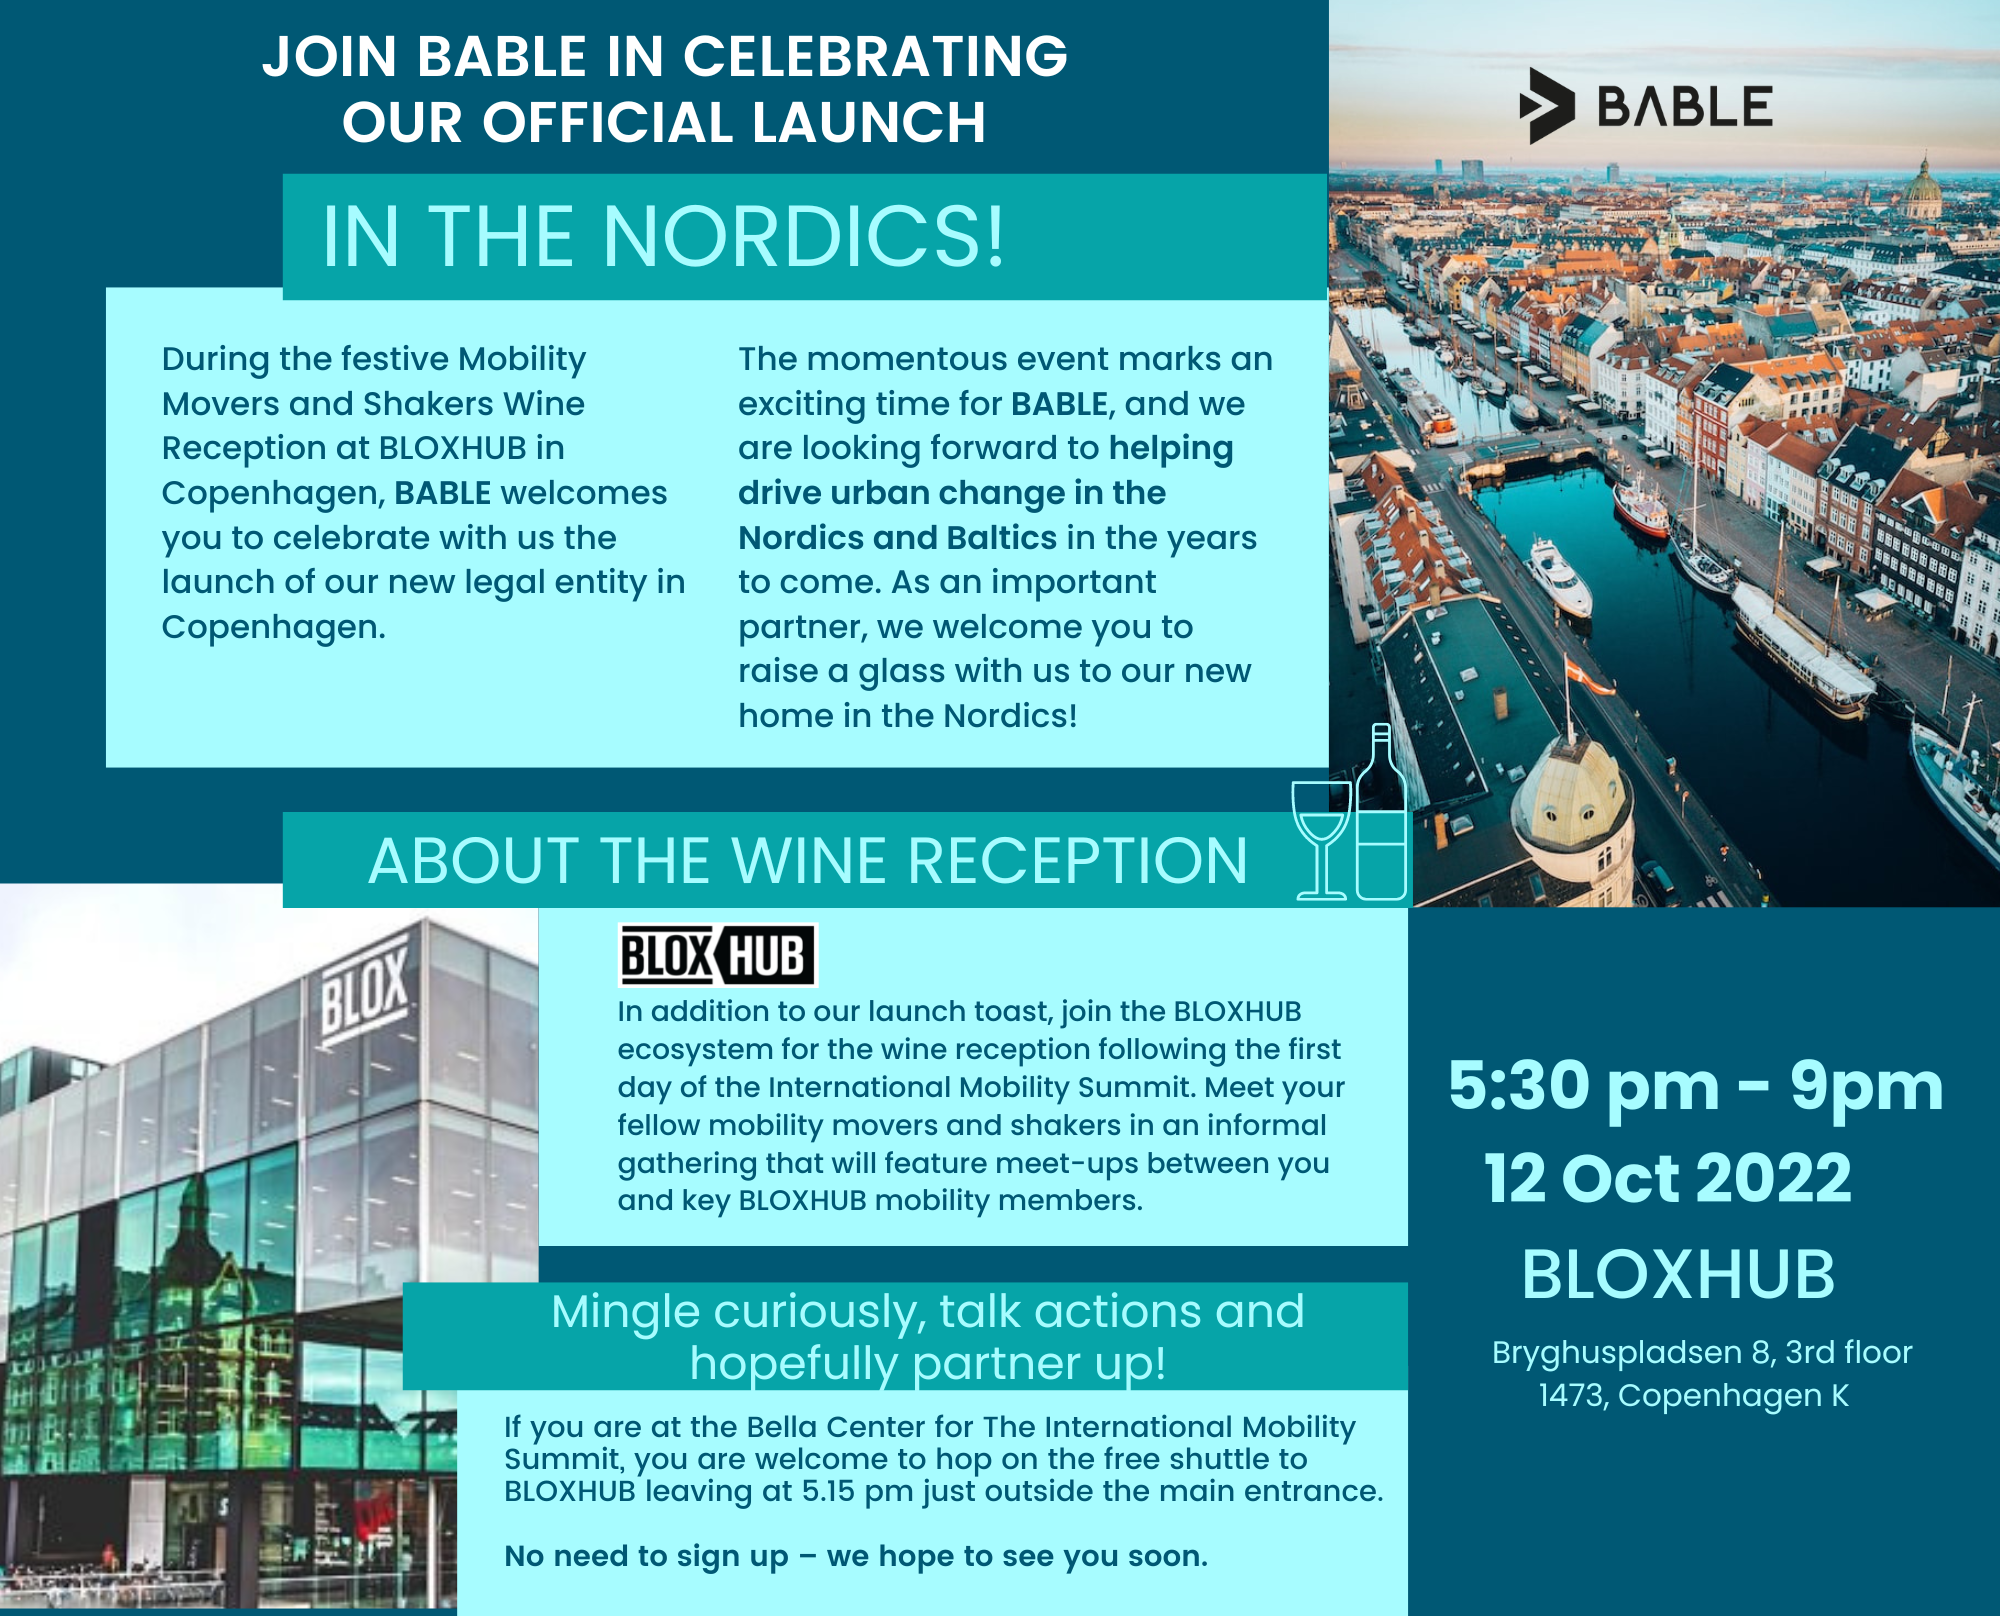 BABLE Smart Cities official launch in the Nordics